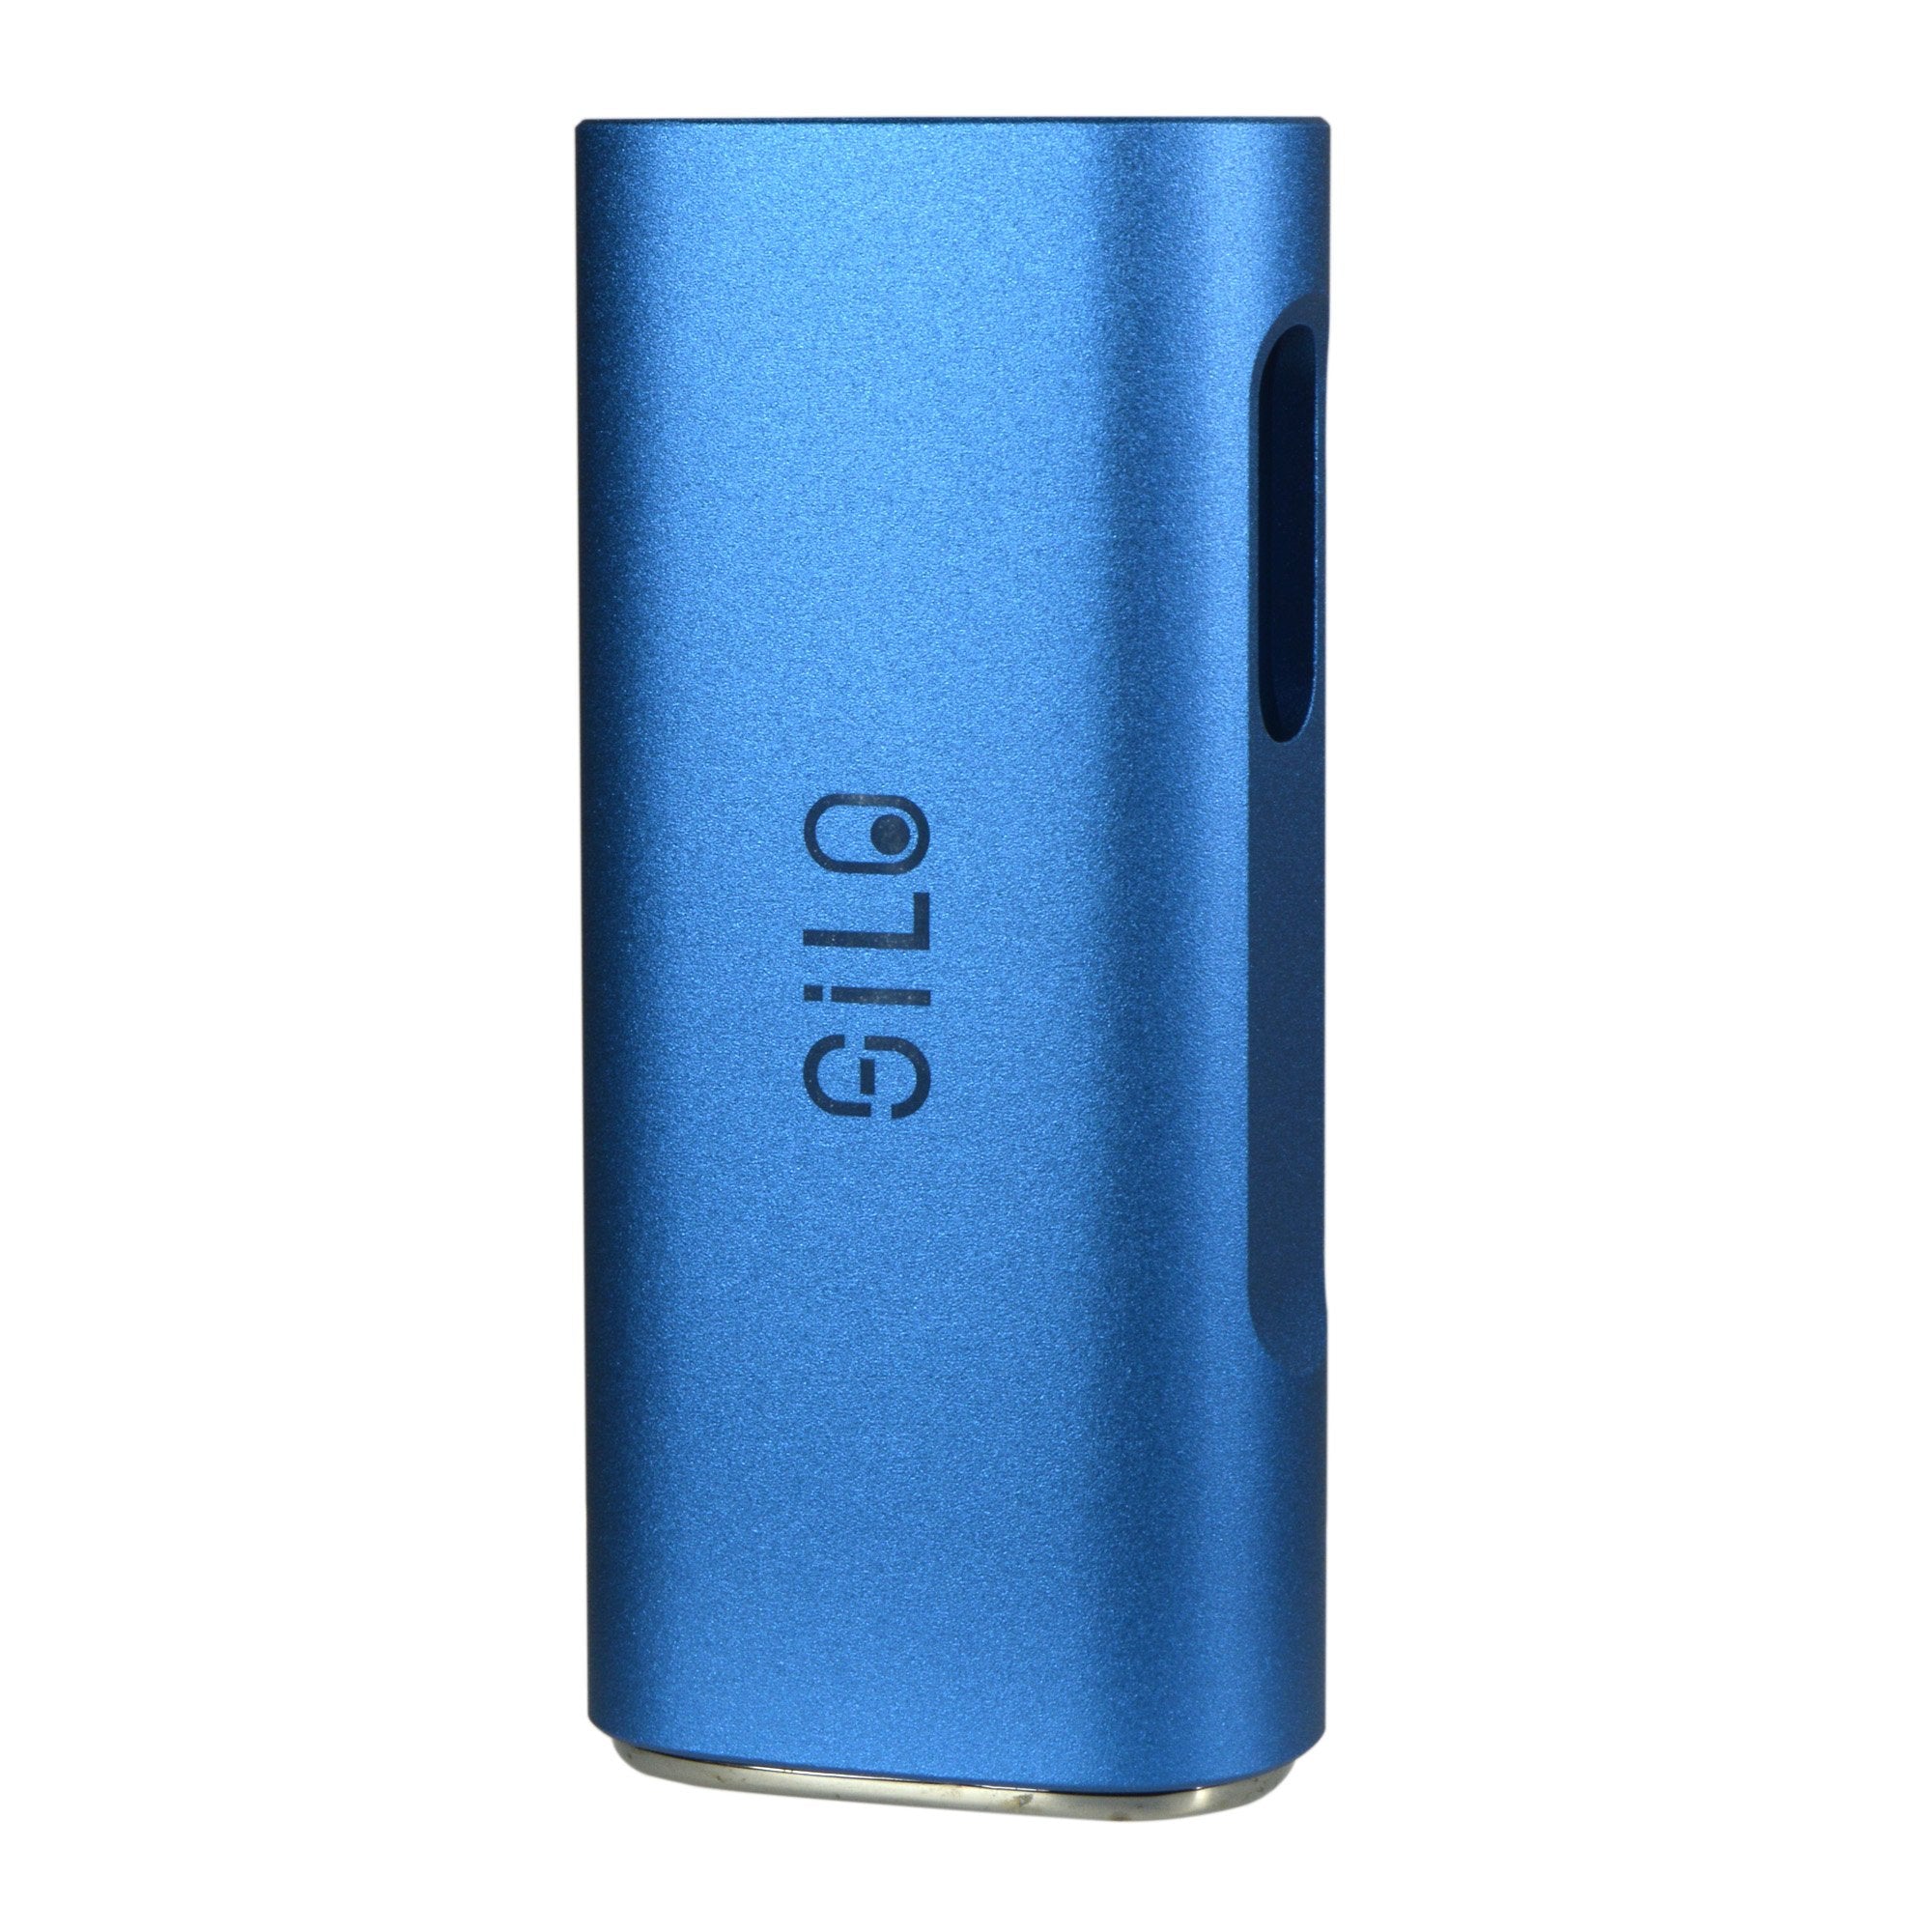 CCELL | Silo Vape Battery with USB Charger | 500mAh - Blue - 510 Thread - 5